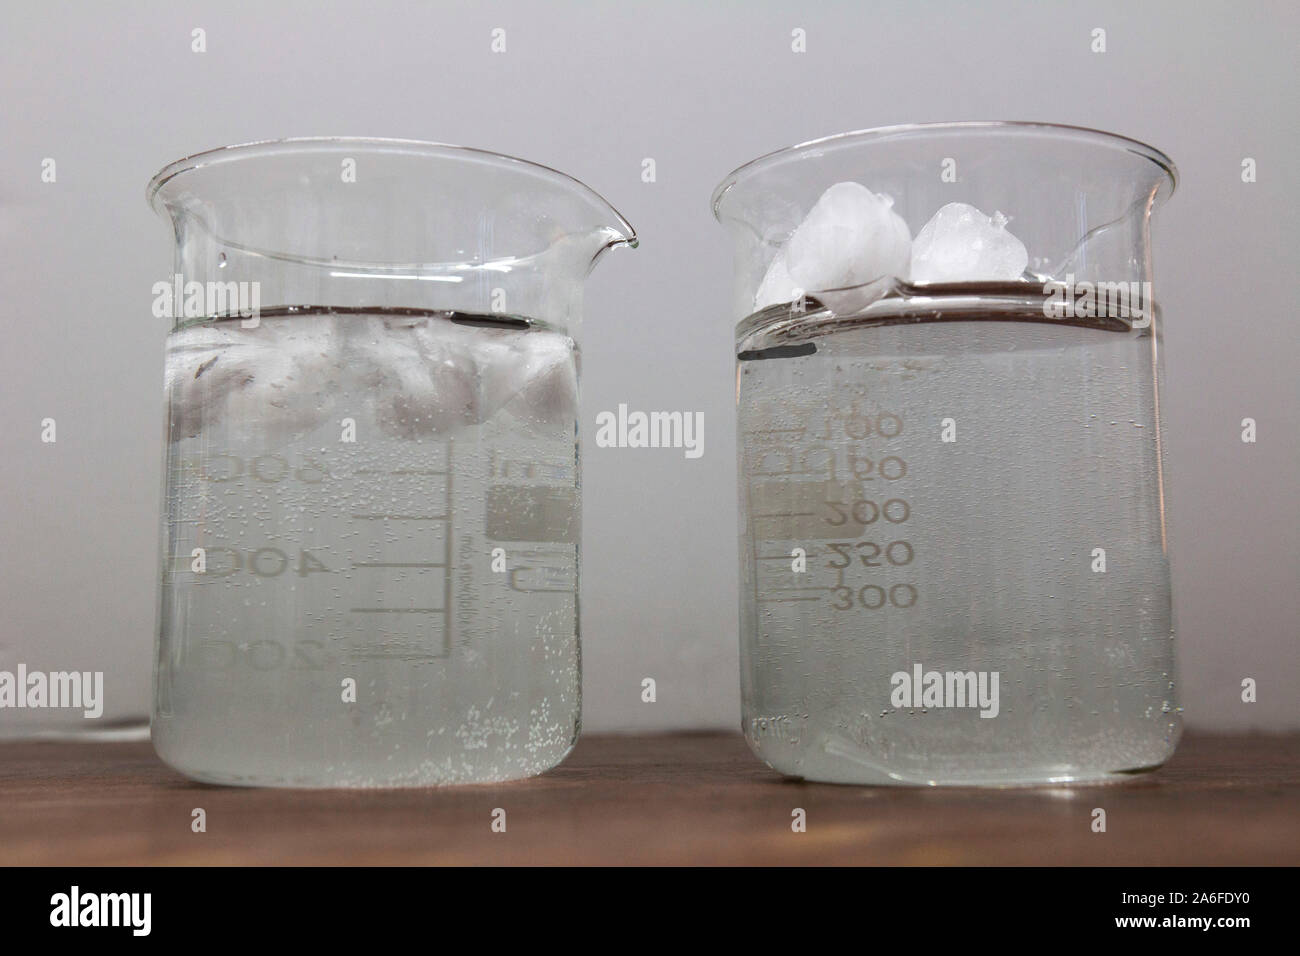 science experiment shows the effects of ice melting in the arctic and antarctic. showing water rising when the ice melts on a landmass. Stock Photo